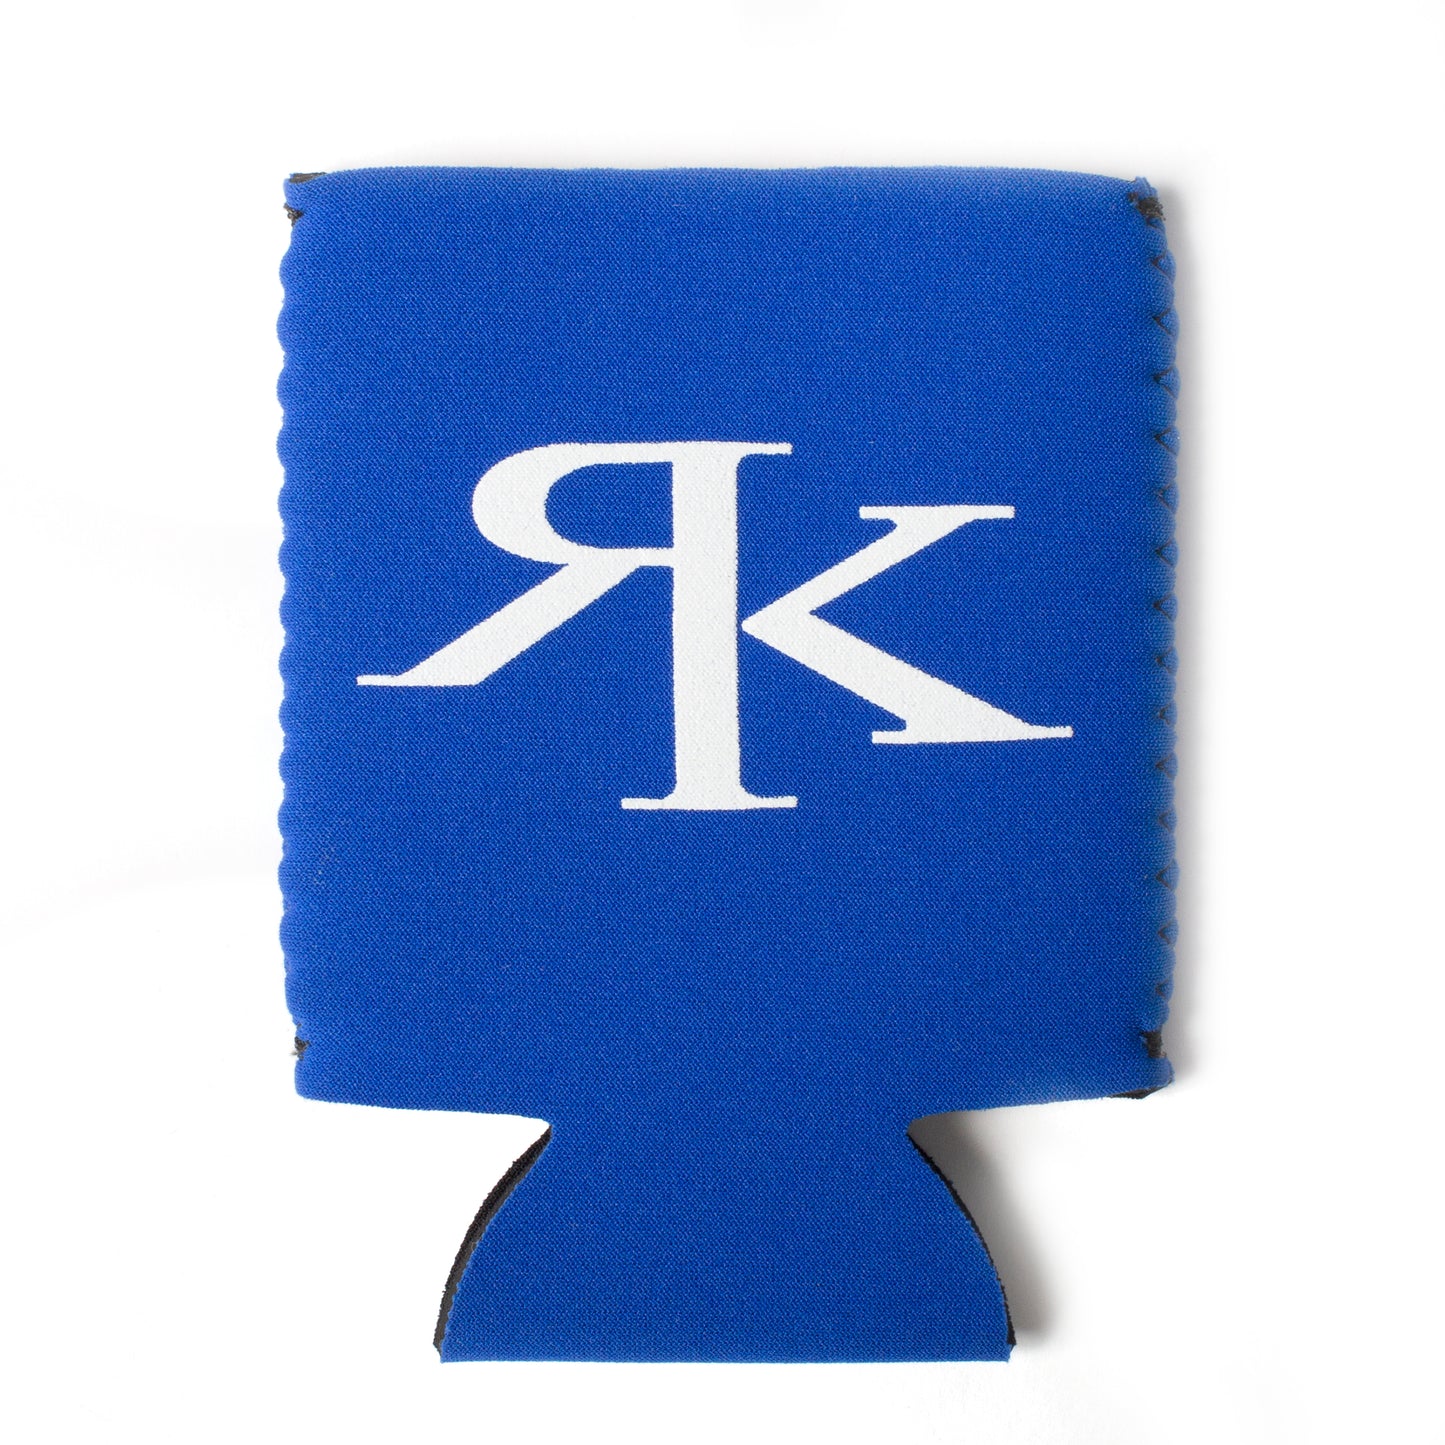 Royal Blue and White RK Boot Koozie